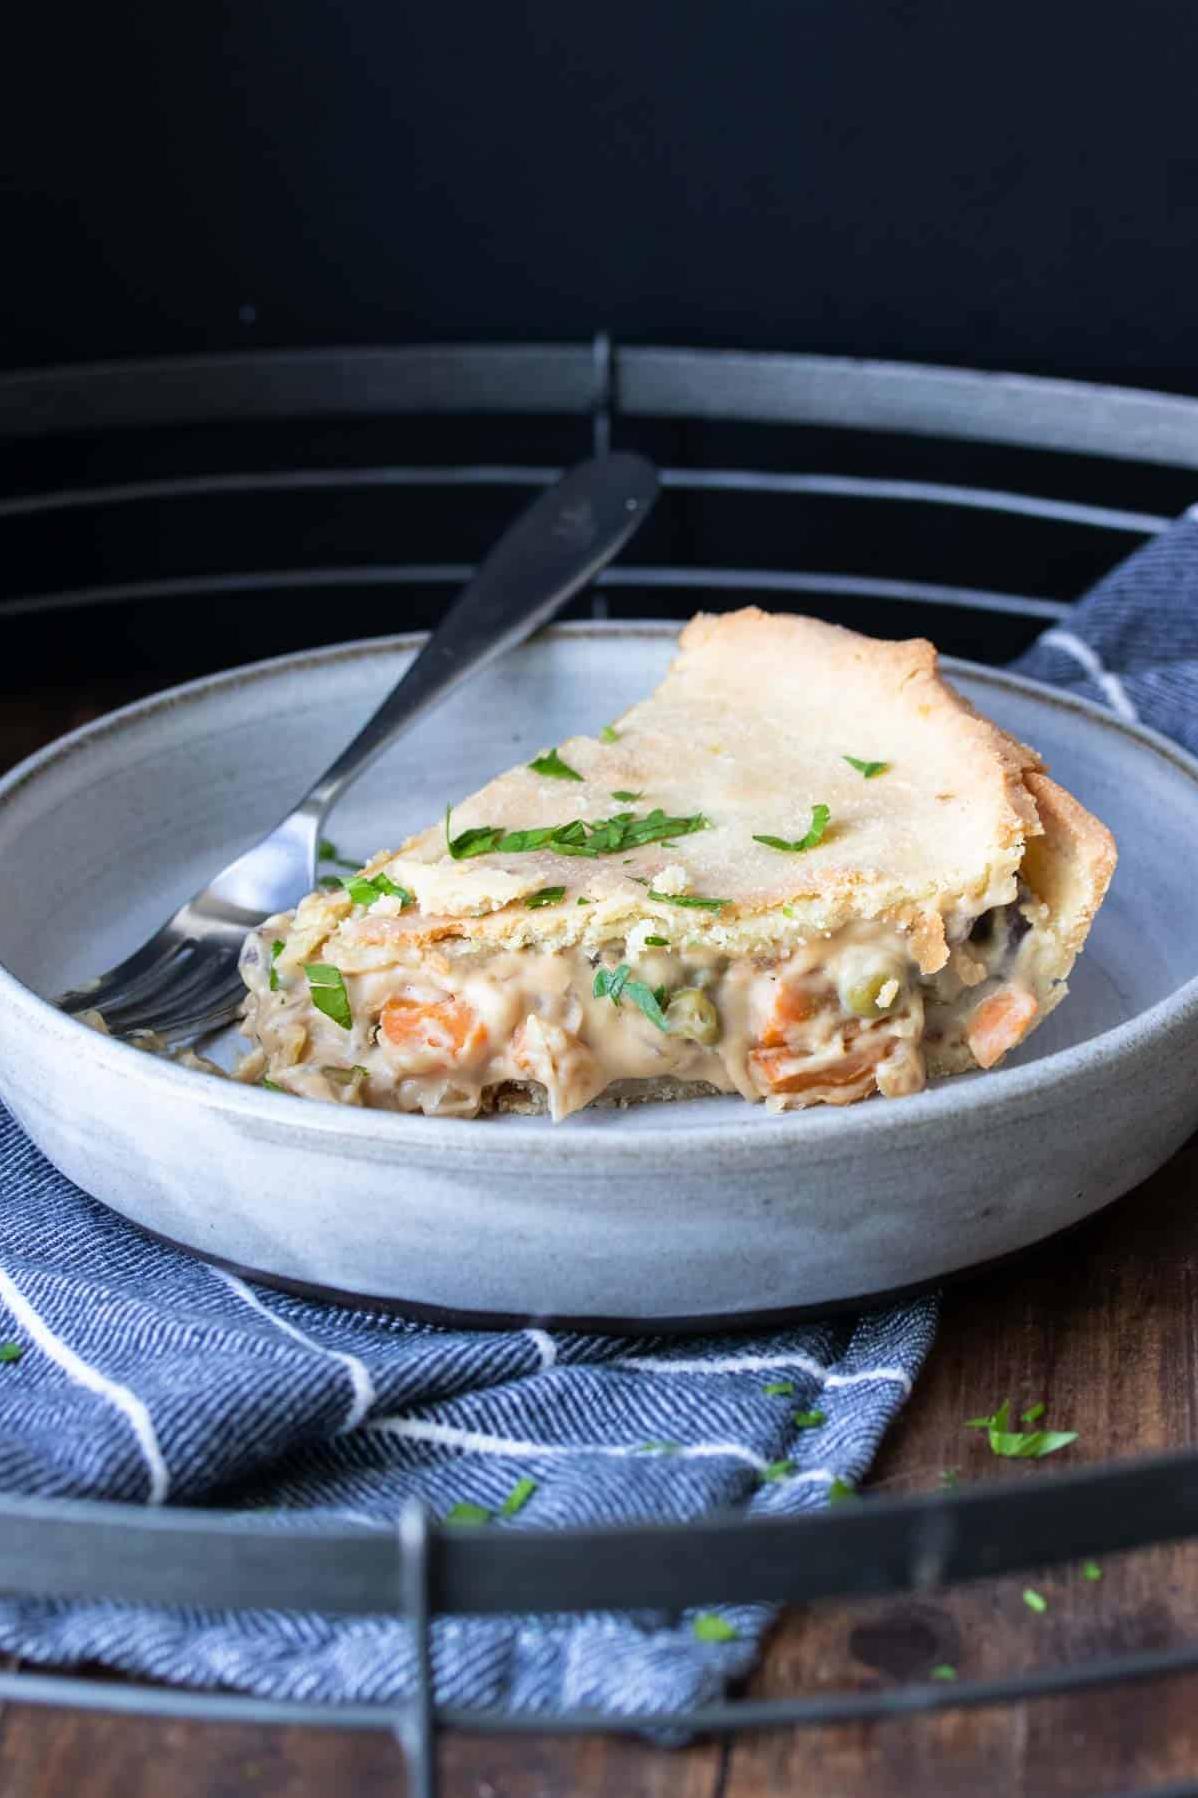  Get your daily dose of veggies in this nutrient-dense gluten-free pie.